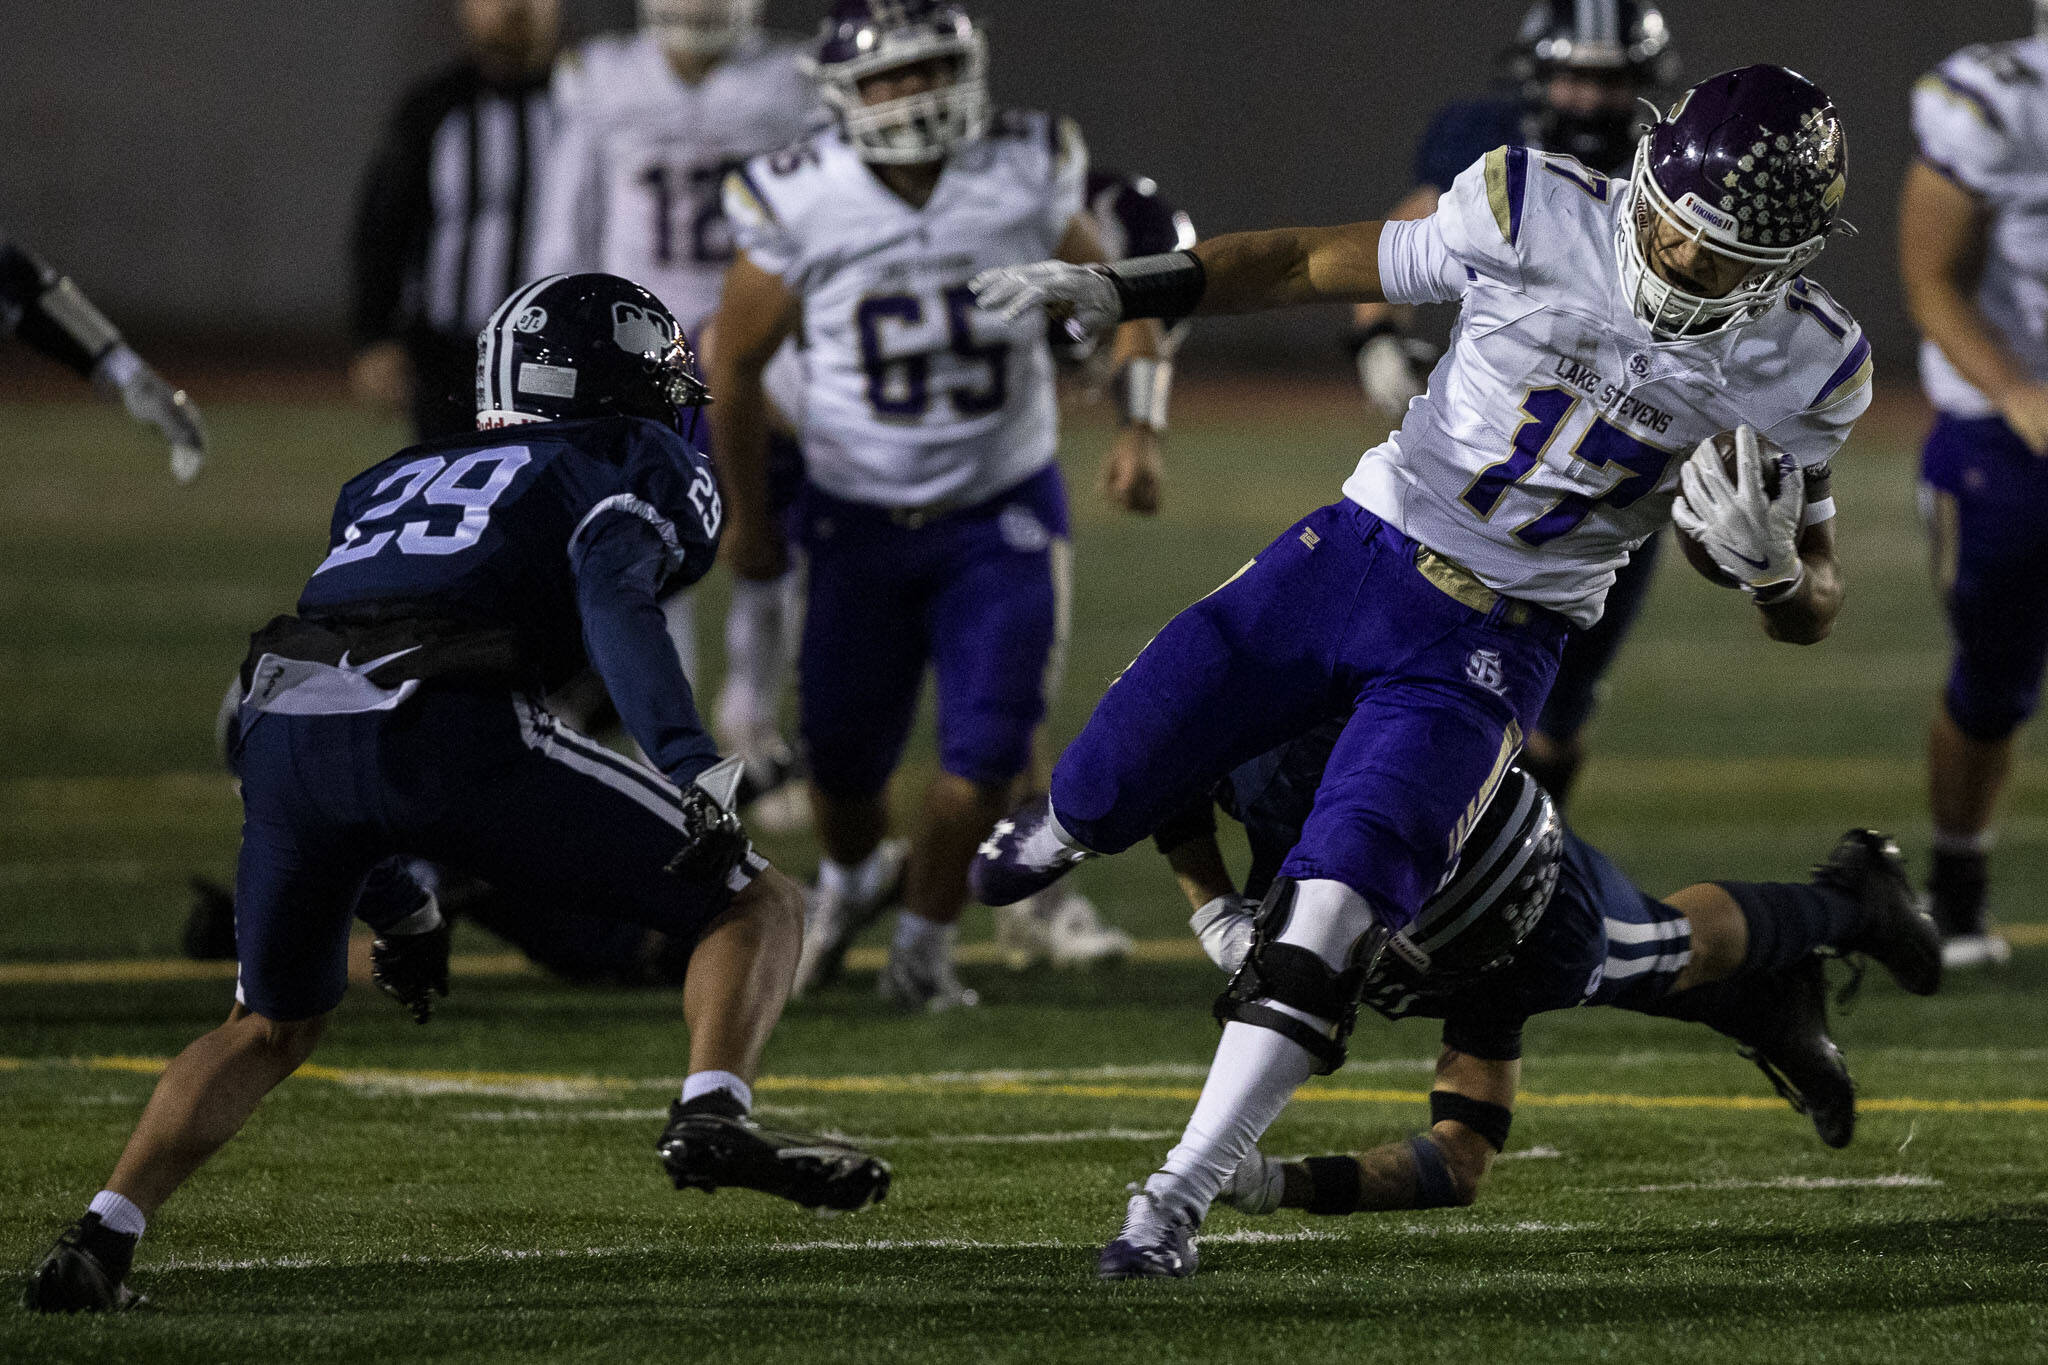 Lake Stevens’ Jayshon Limar (17) runs with the ball during a game between Glacier Peak and Lake Stevens at Veterans Memorial Stadium in Snohomish, Washington on Friday, Oct. 27, 2023. Lake Stevens won, 42-7. (Annie Barker / The Herald)